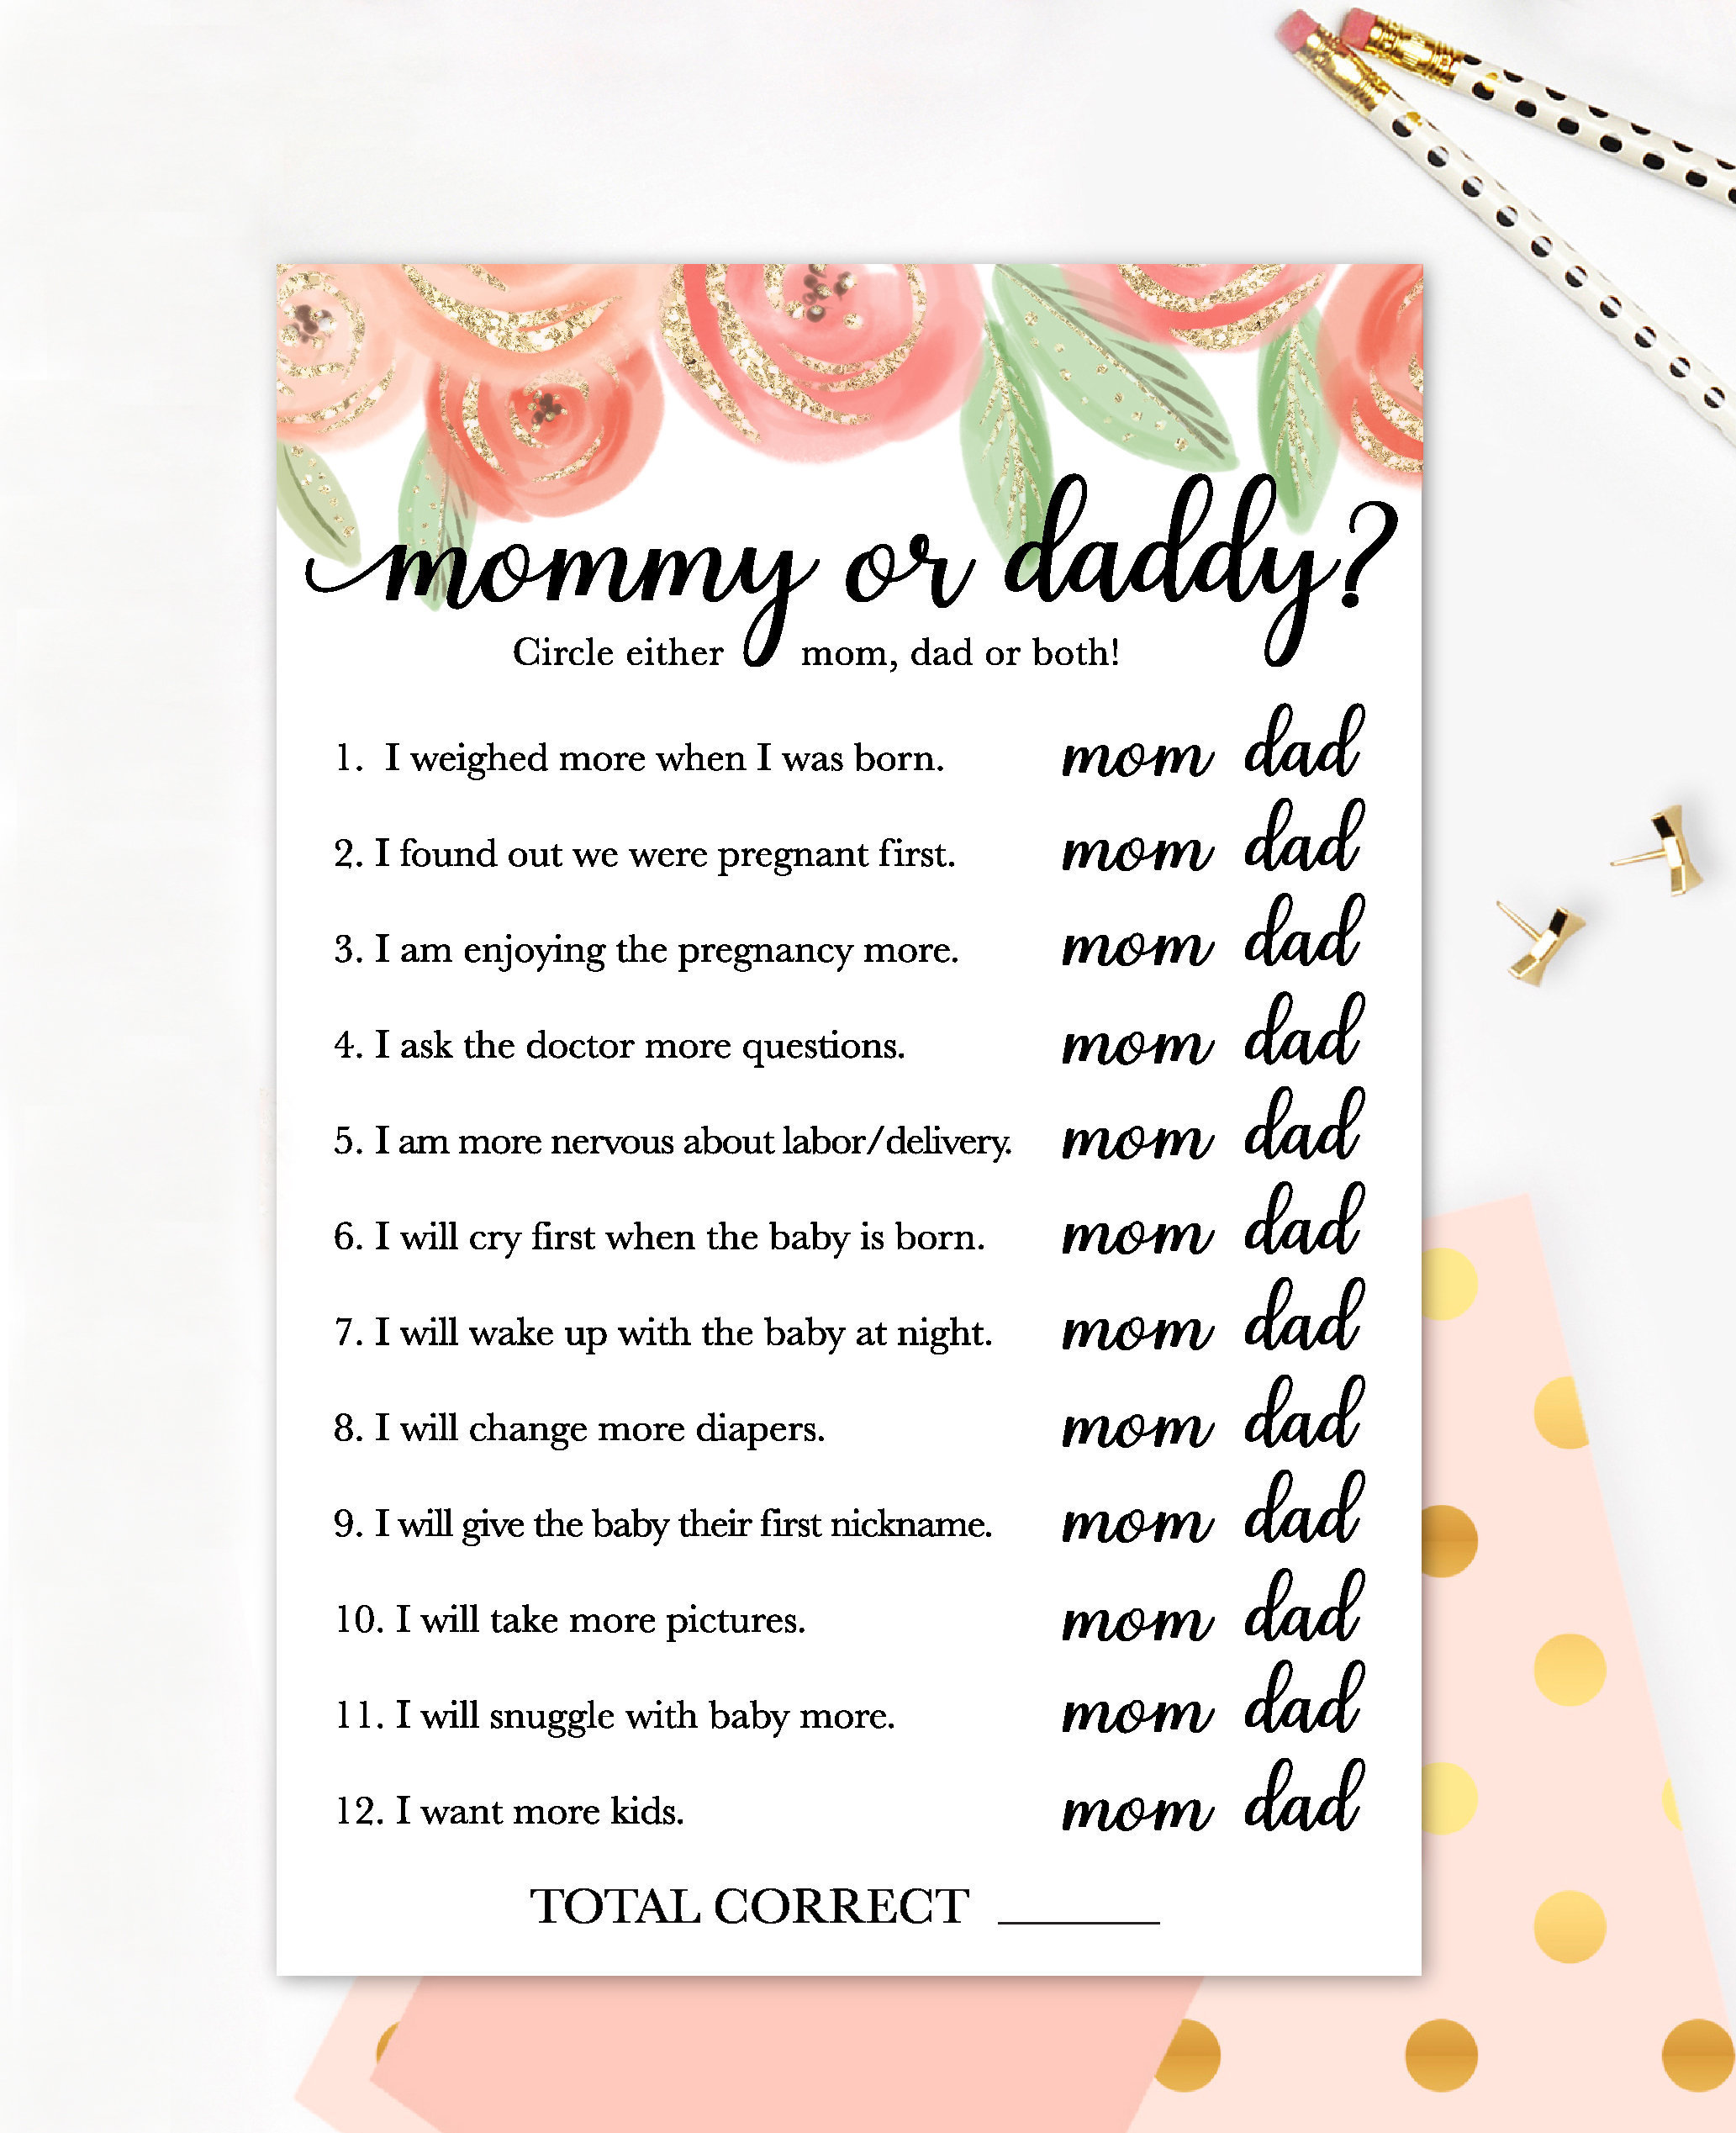 paper-party-supplies-tropical-pink-guess-who-game-mommy-or-daddy-baby